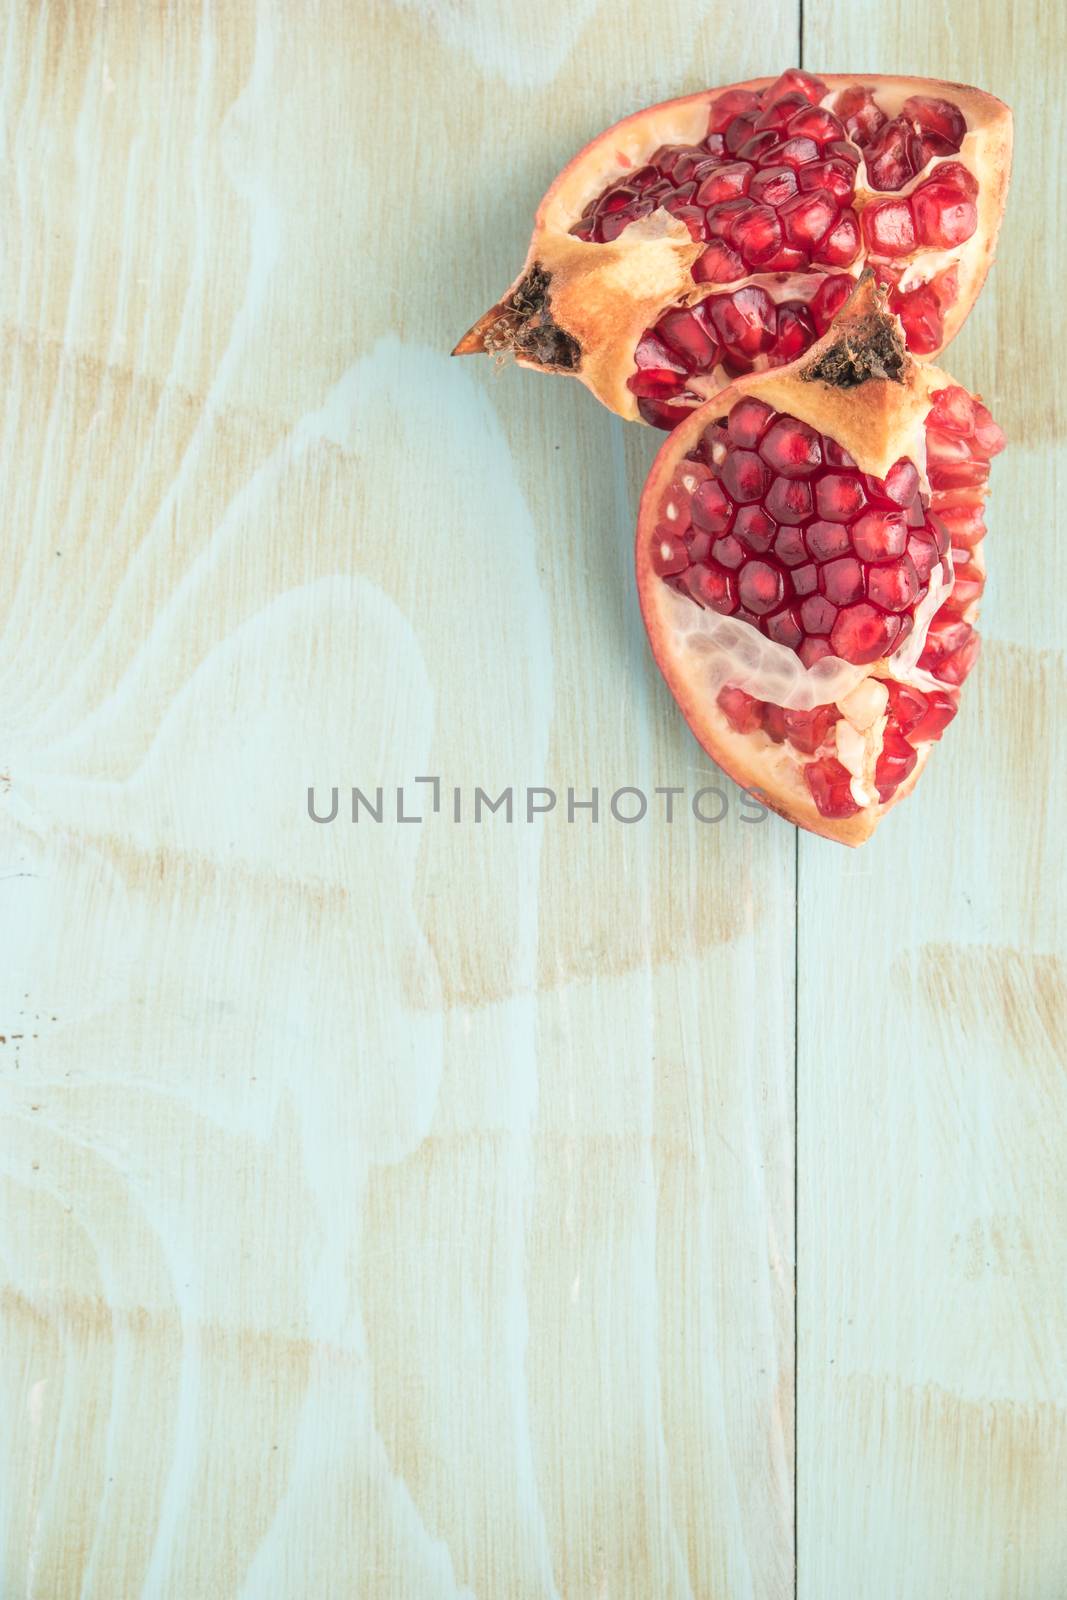 Red ripe peeled pomegranate on rustic wood board background. Top view, copy space